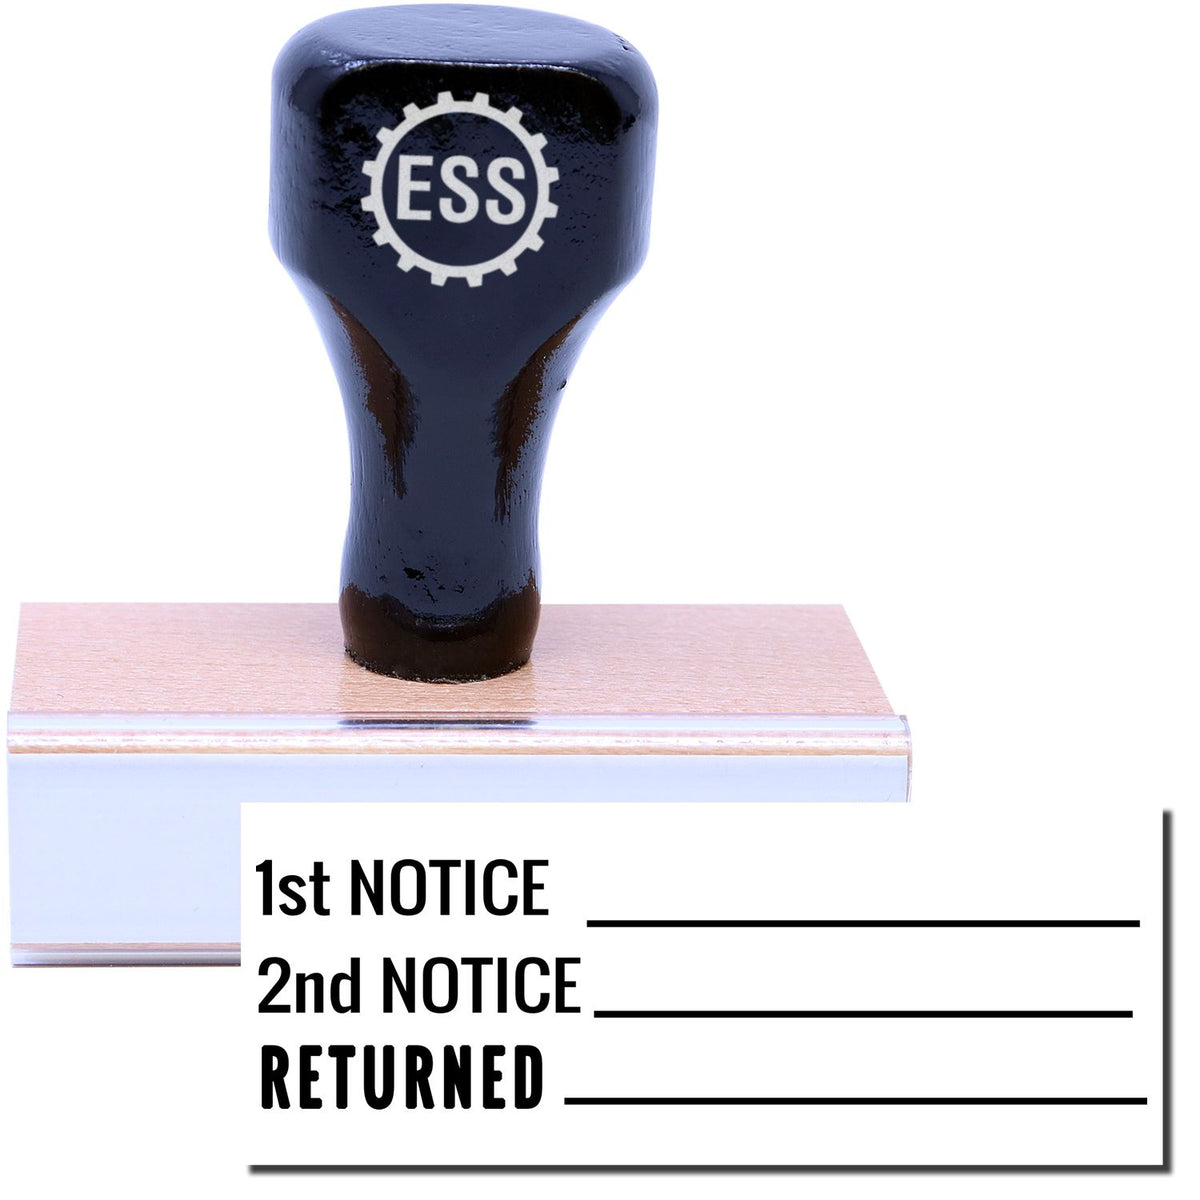 A stock office rubber stamp with a stamped image showing how the texts &quot;1st NOTICE&quot;, &quot;2nd NOTICE&quot;, and &quot;RETURNED&quot; with a line after each one of them are displayed after stamping.